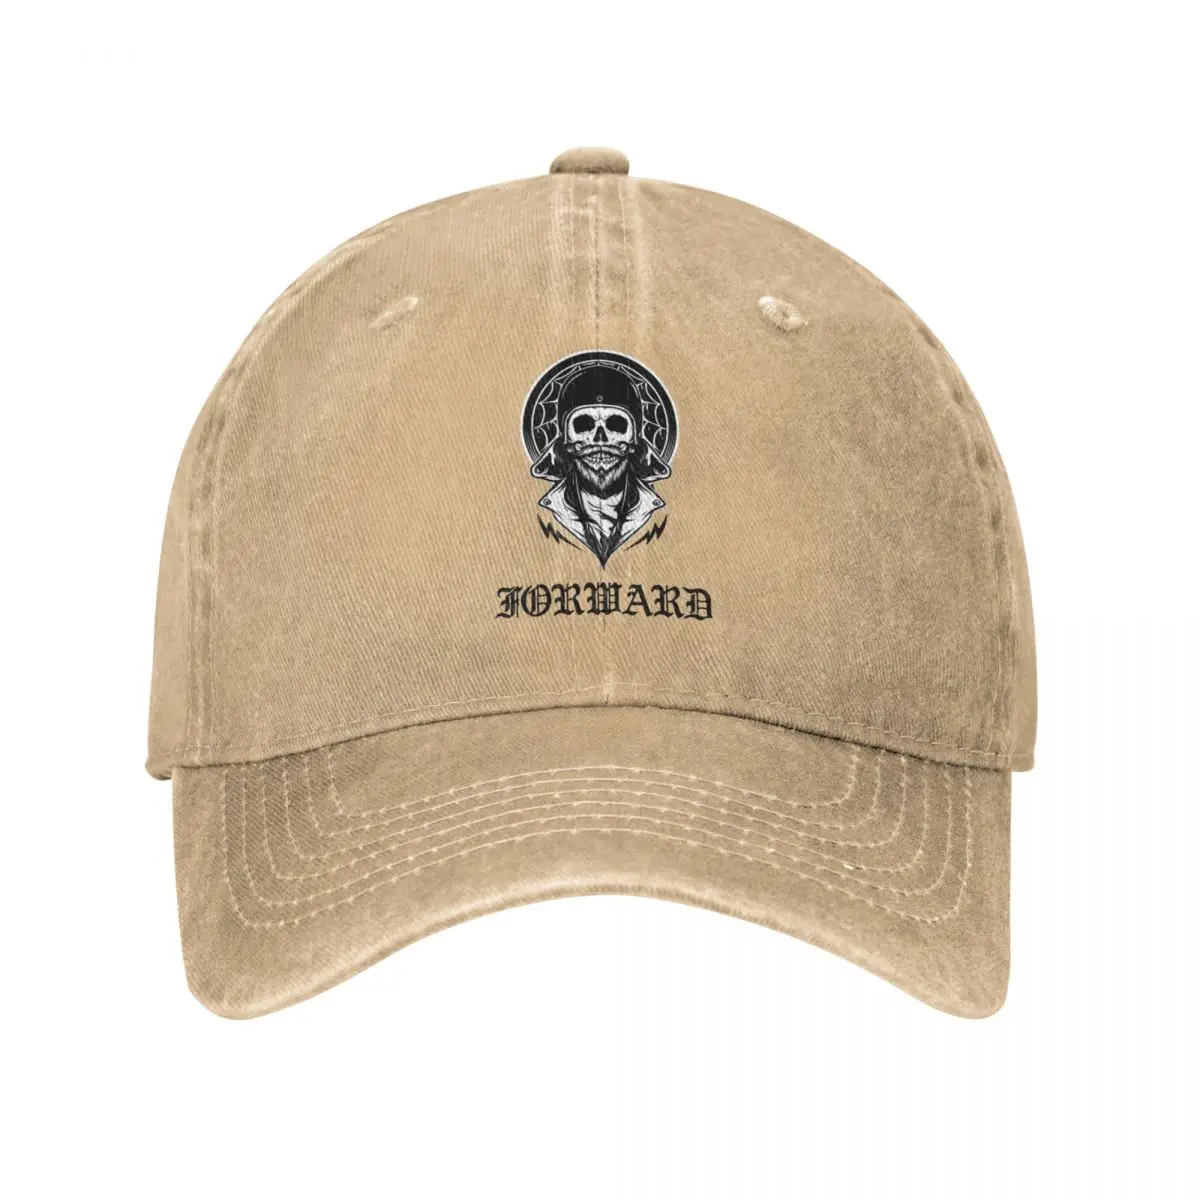 

Forward Observations Group Military Unisex Baseball Cap Distressed Washed Hats Cap Casual Outdoor Workouts Snapback Hat